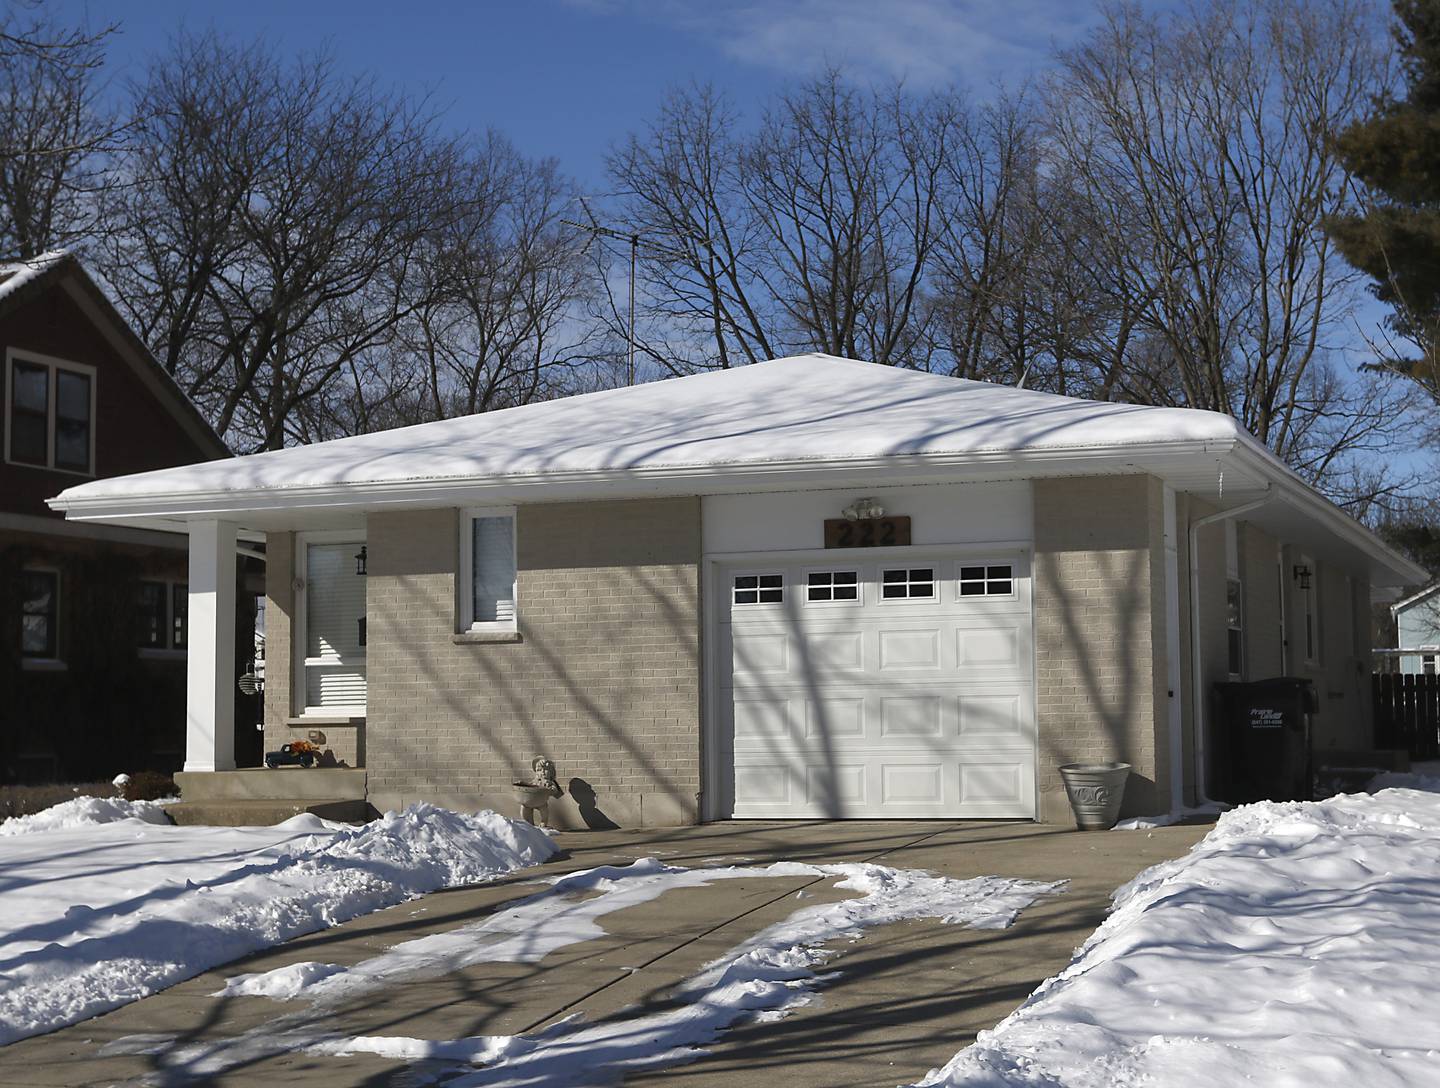 A home in the 200 block of College Street on Friday, Feb. 3, 2023. Crystal Lake officials are weighing options for rules concerning Airbnb or short-term rentals after neighbors raised concerns about this house on College Street being used as an Airbnb.